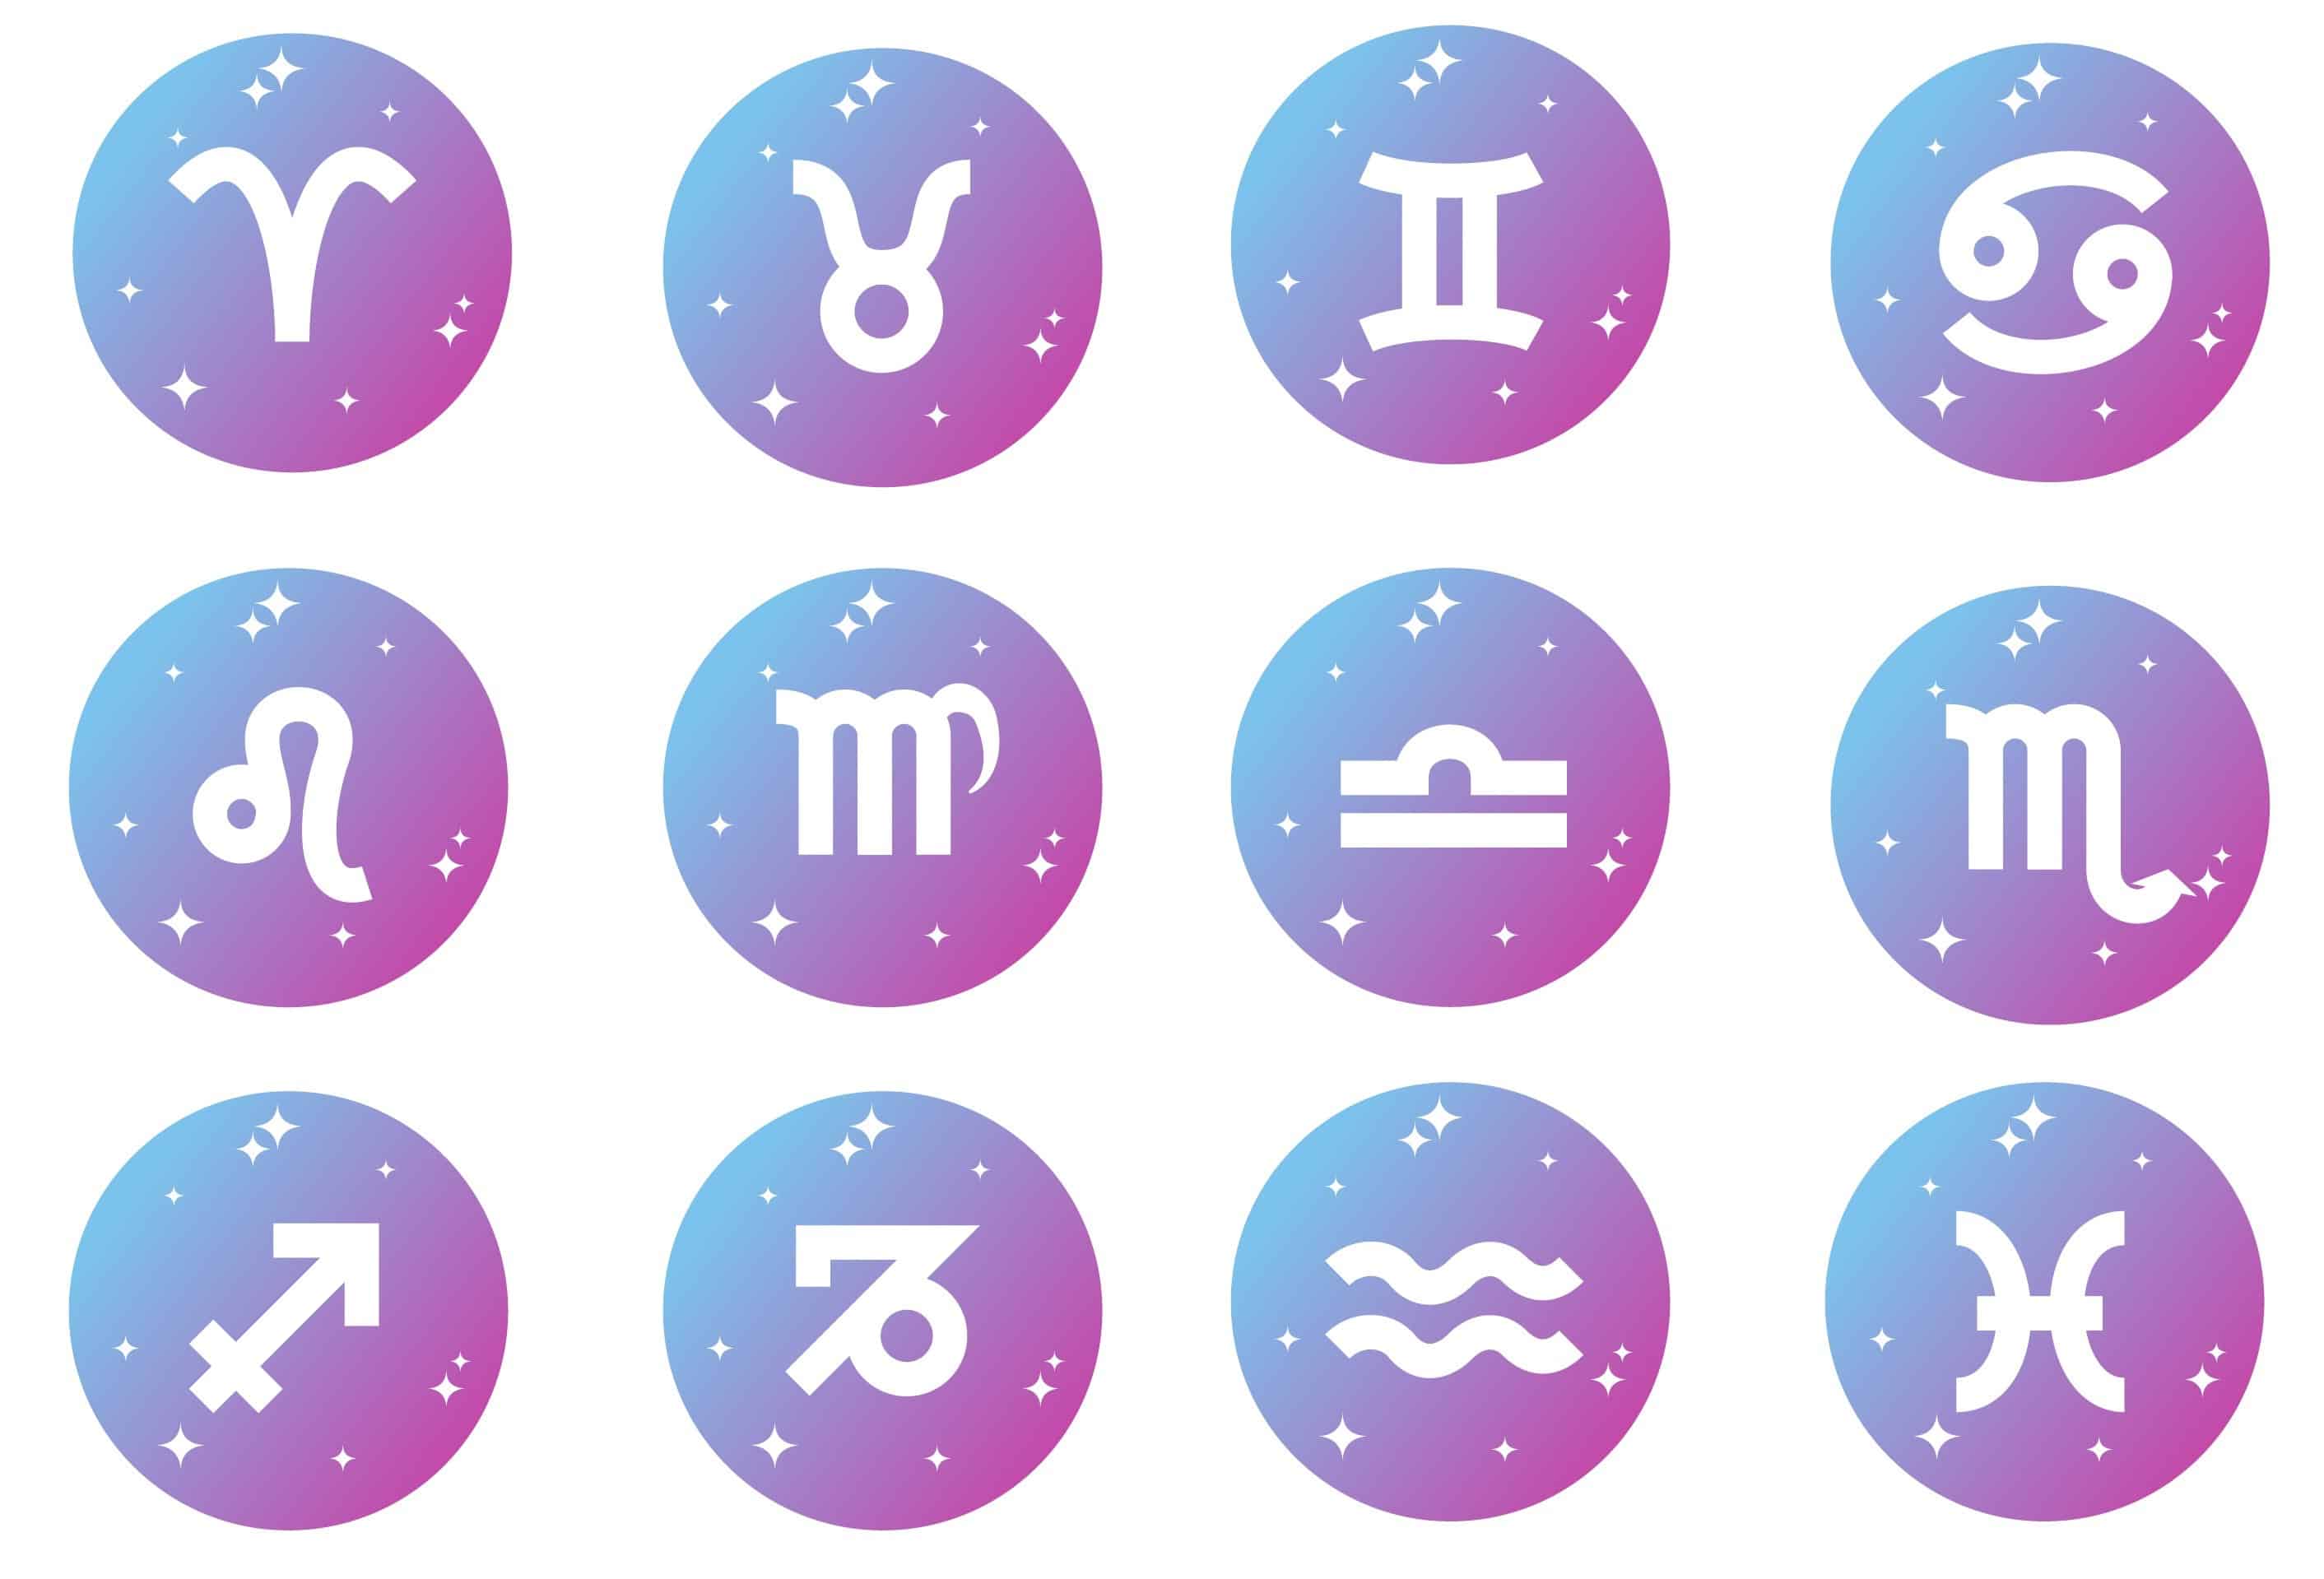 Zodiac Sign Symbols & Their Meanings